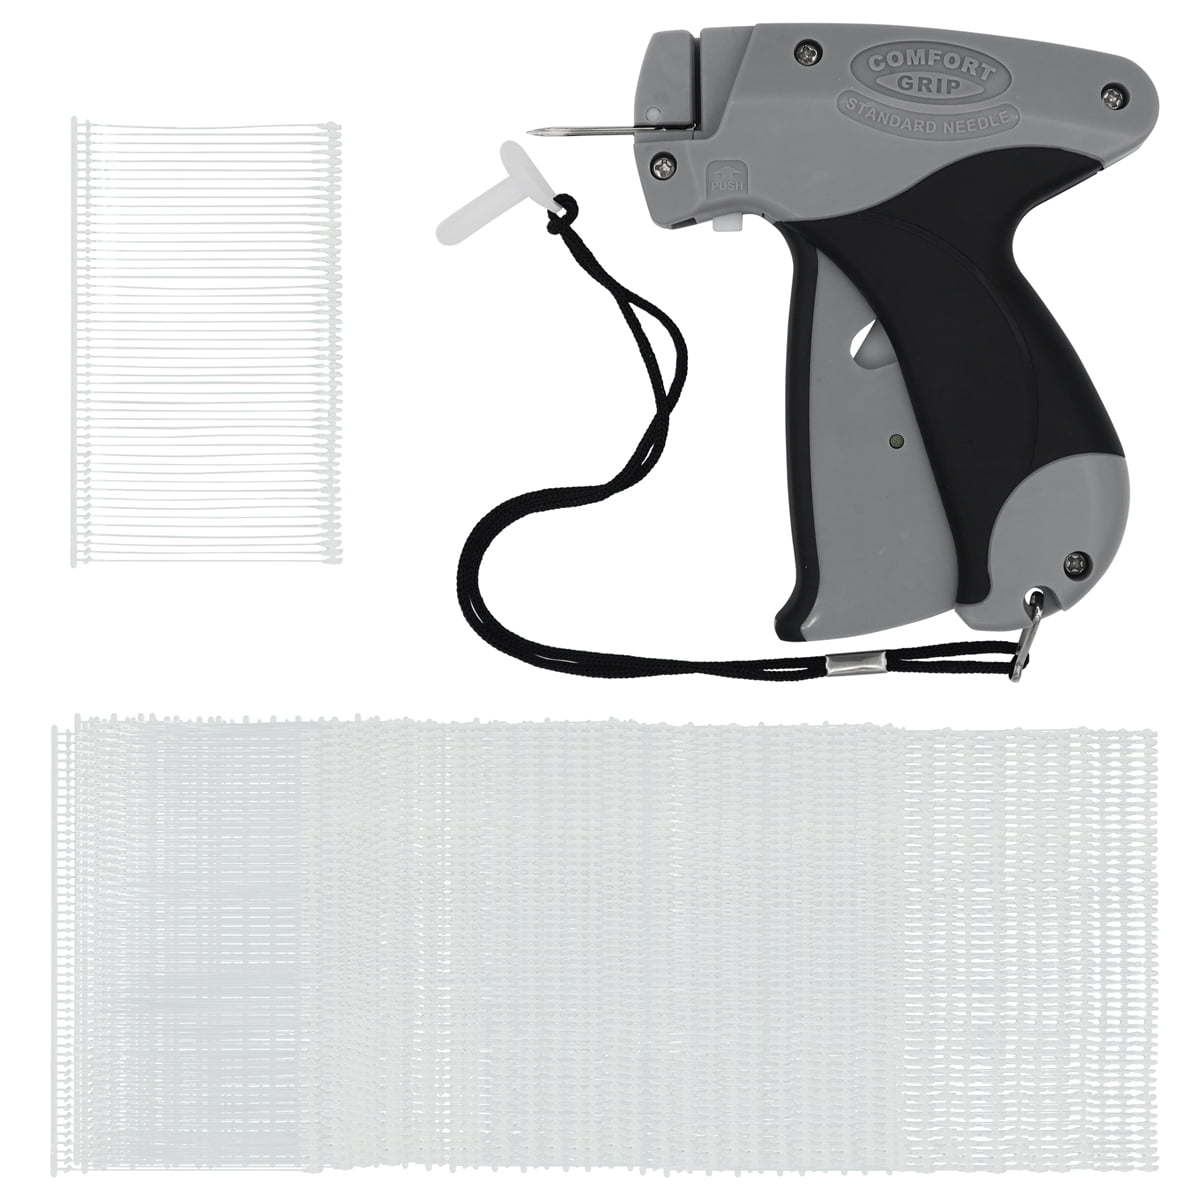 Clothes Tagging Gun-Garment Price Tag Gun-Easy to Load-Comfort Grip-Includes 5000 Fasteners and 6 Needles Perfect for All Your Pricing Needs 